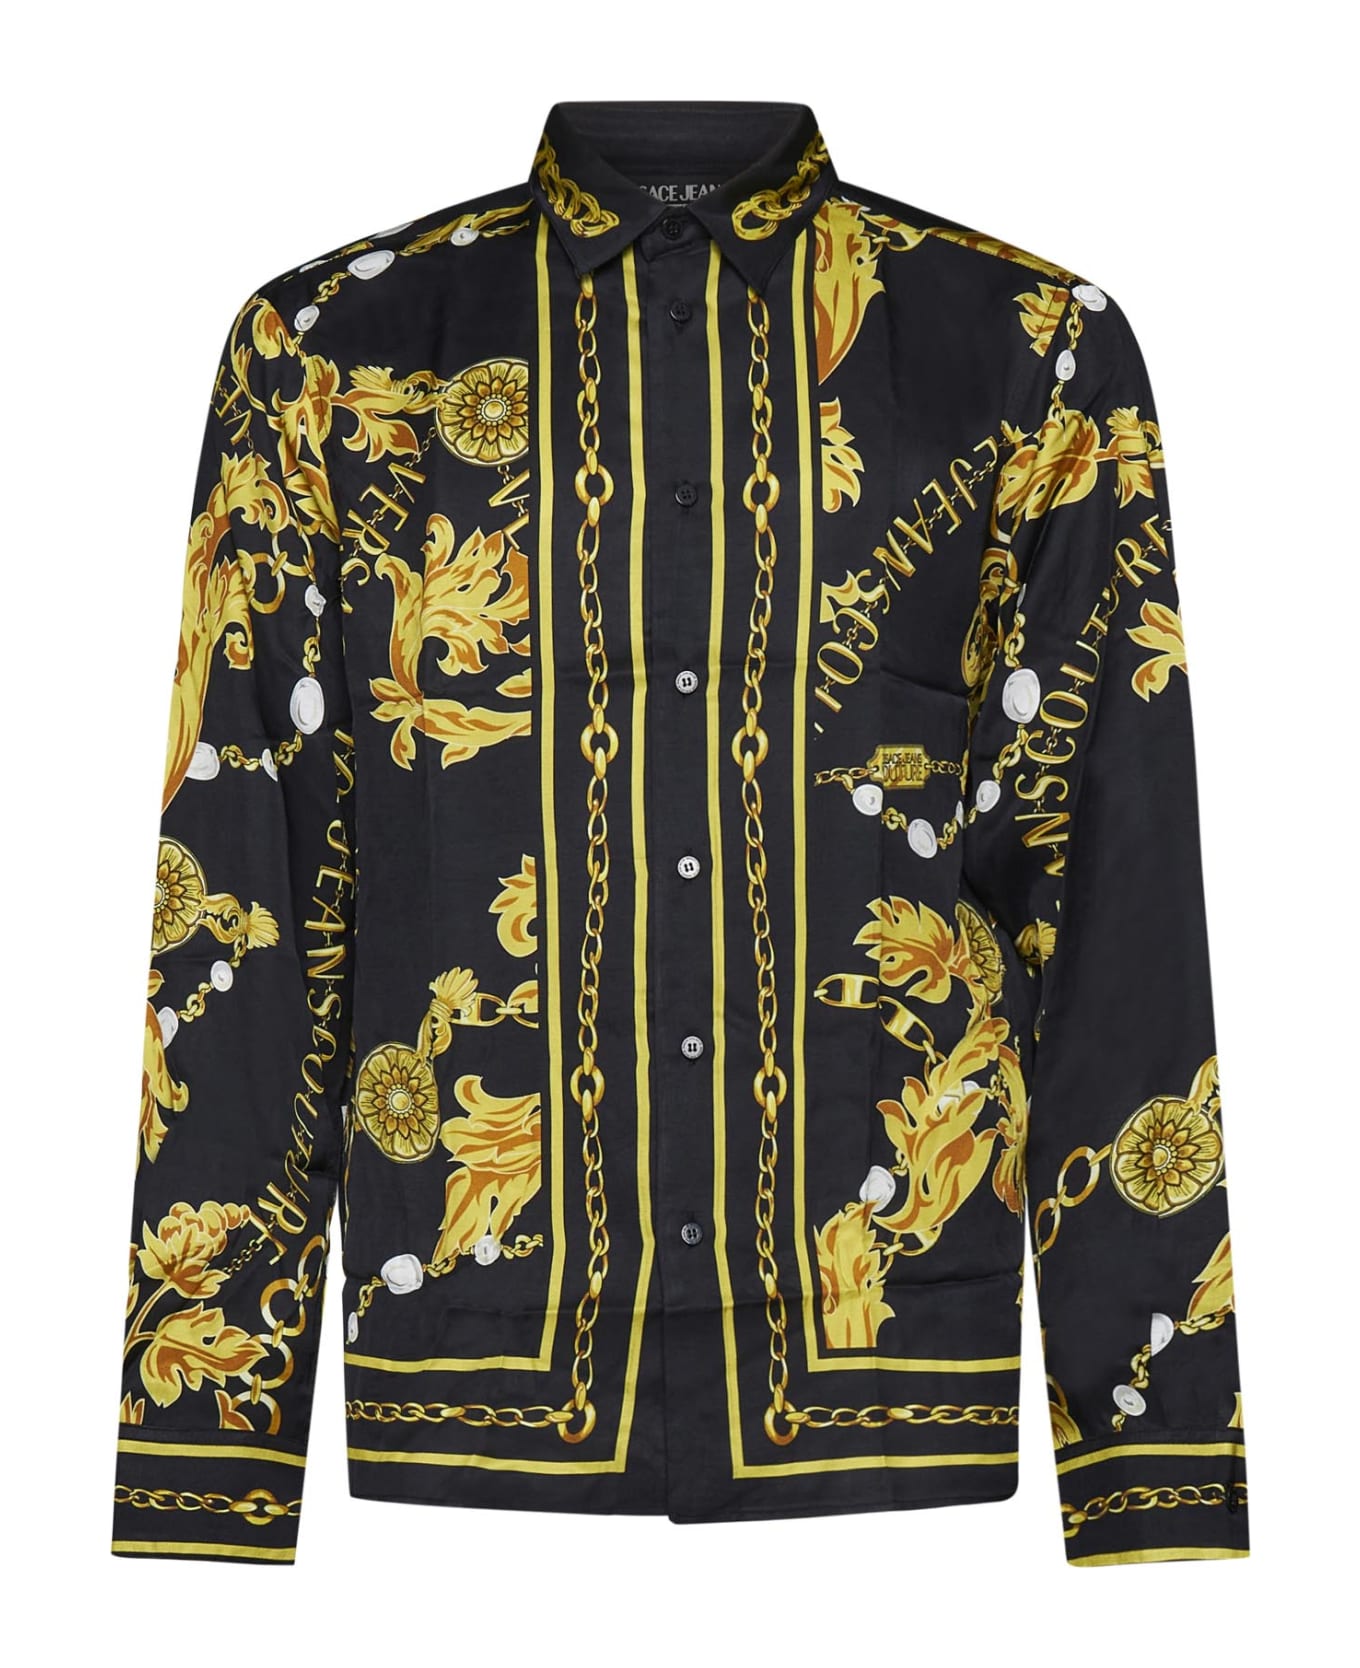 Versace Jeans Couture Chain Couture Print Shirt - Black Gold